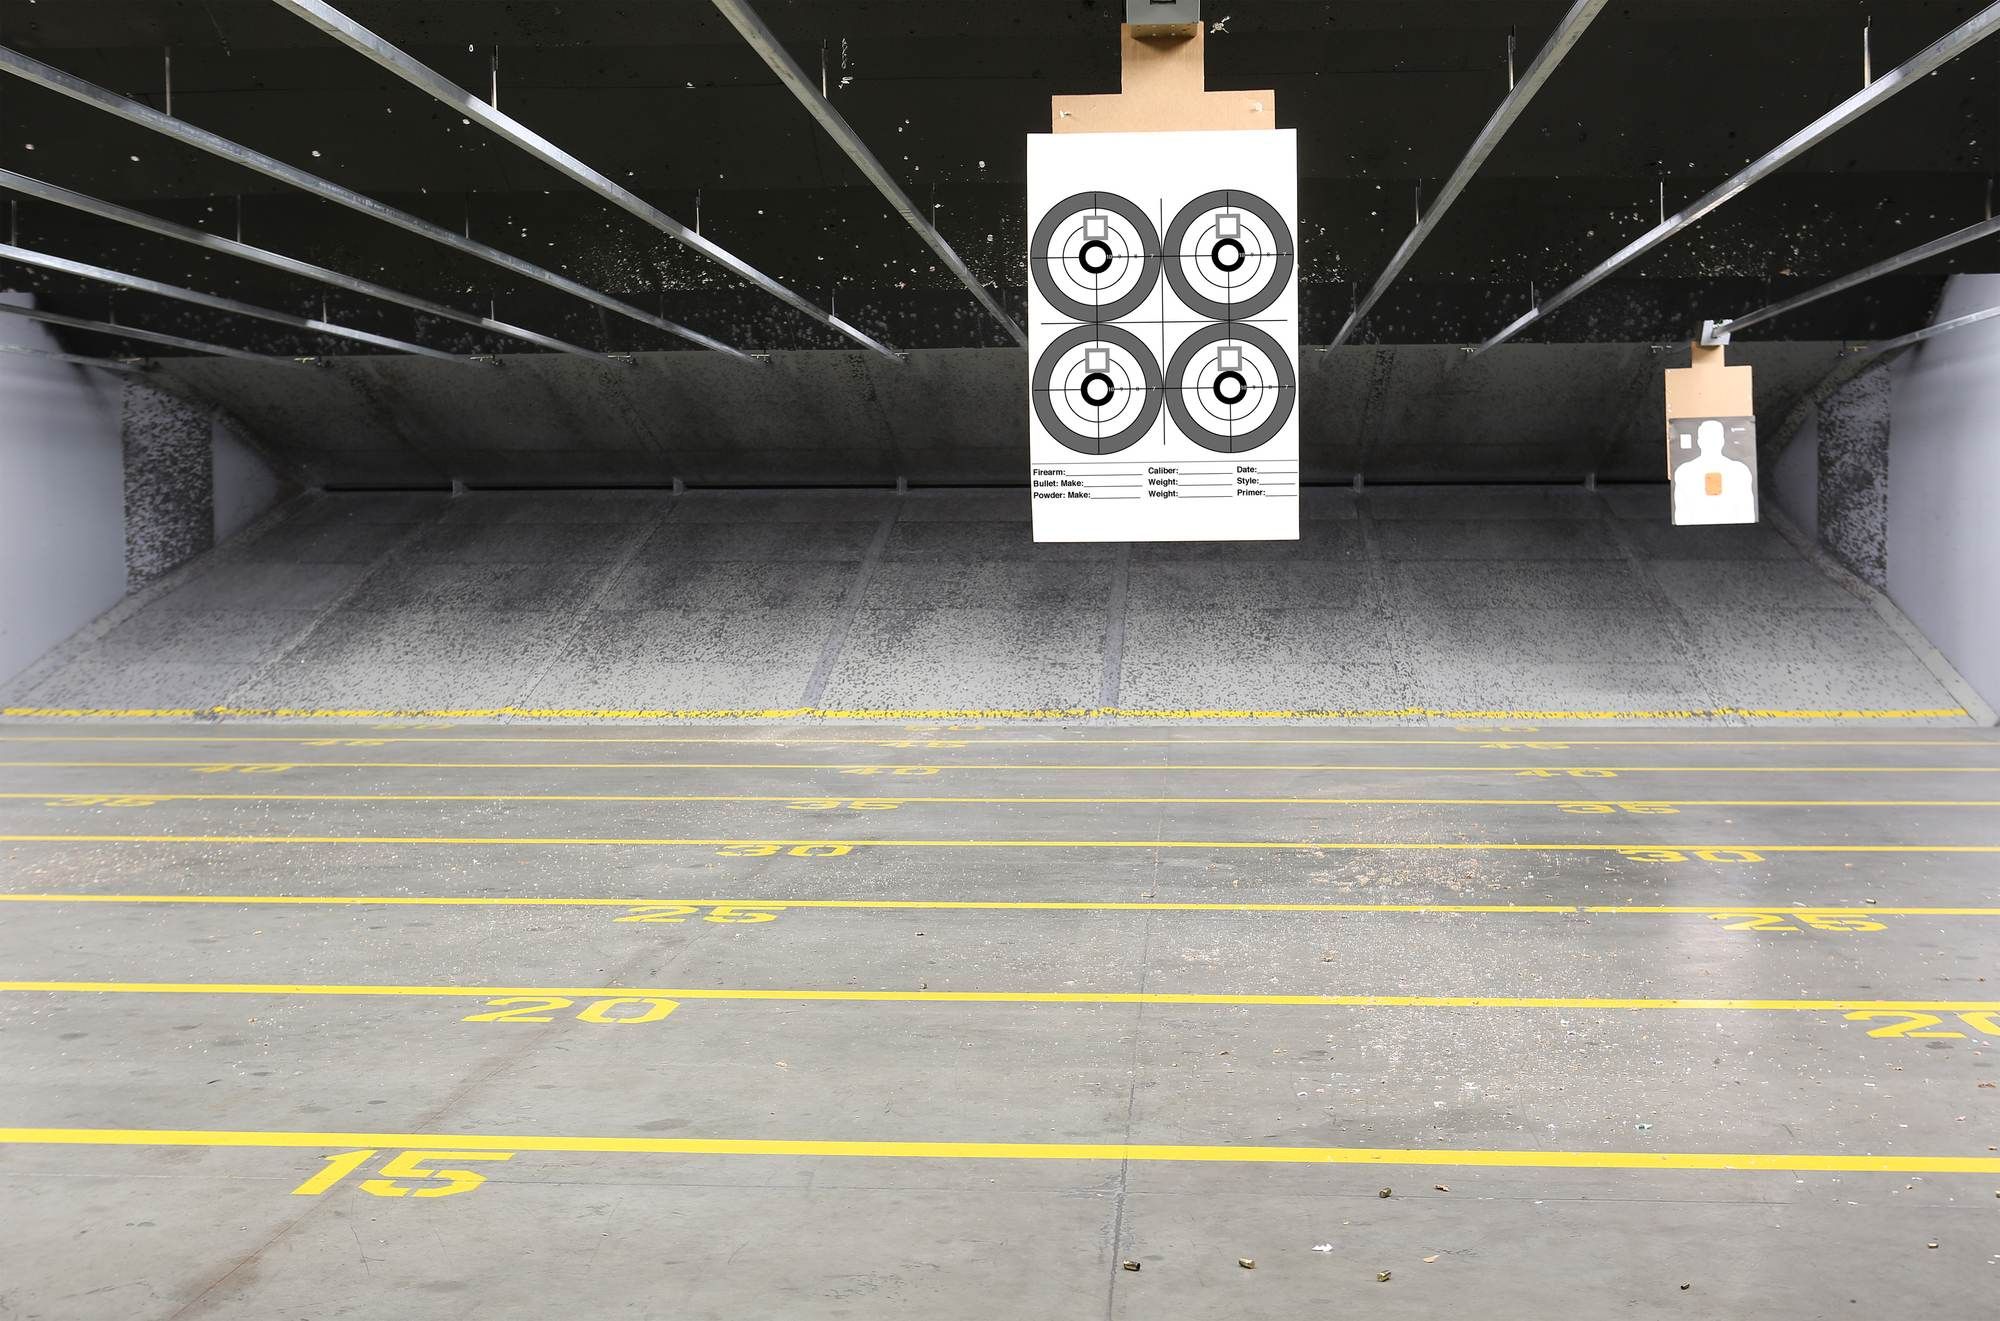 A recent gun range class action lawsuit argues that the government can't order the venues to be closed.